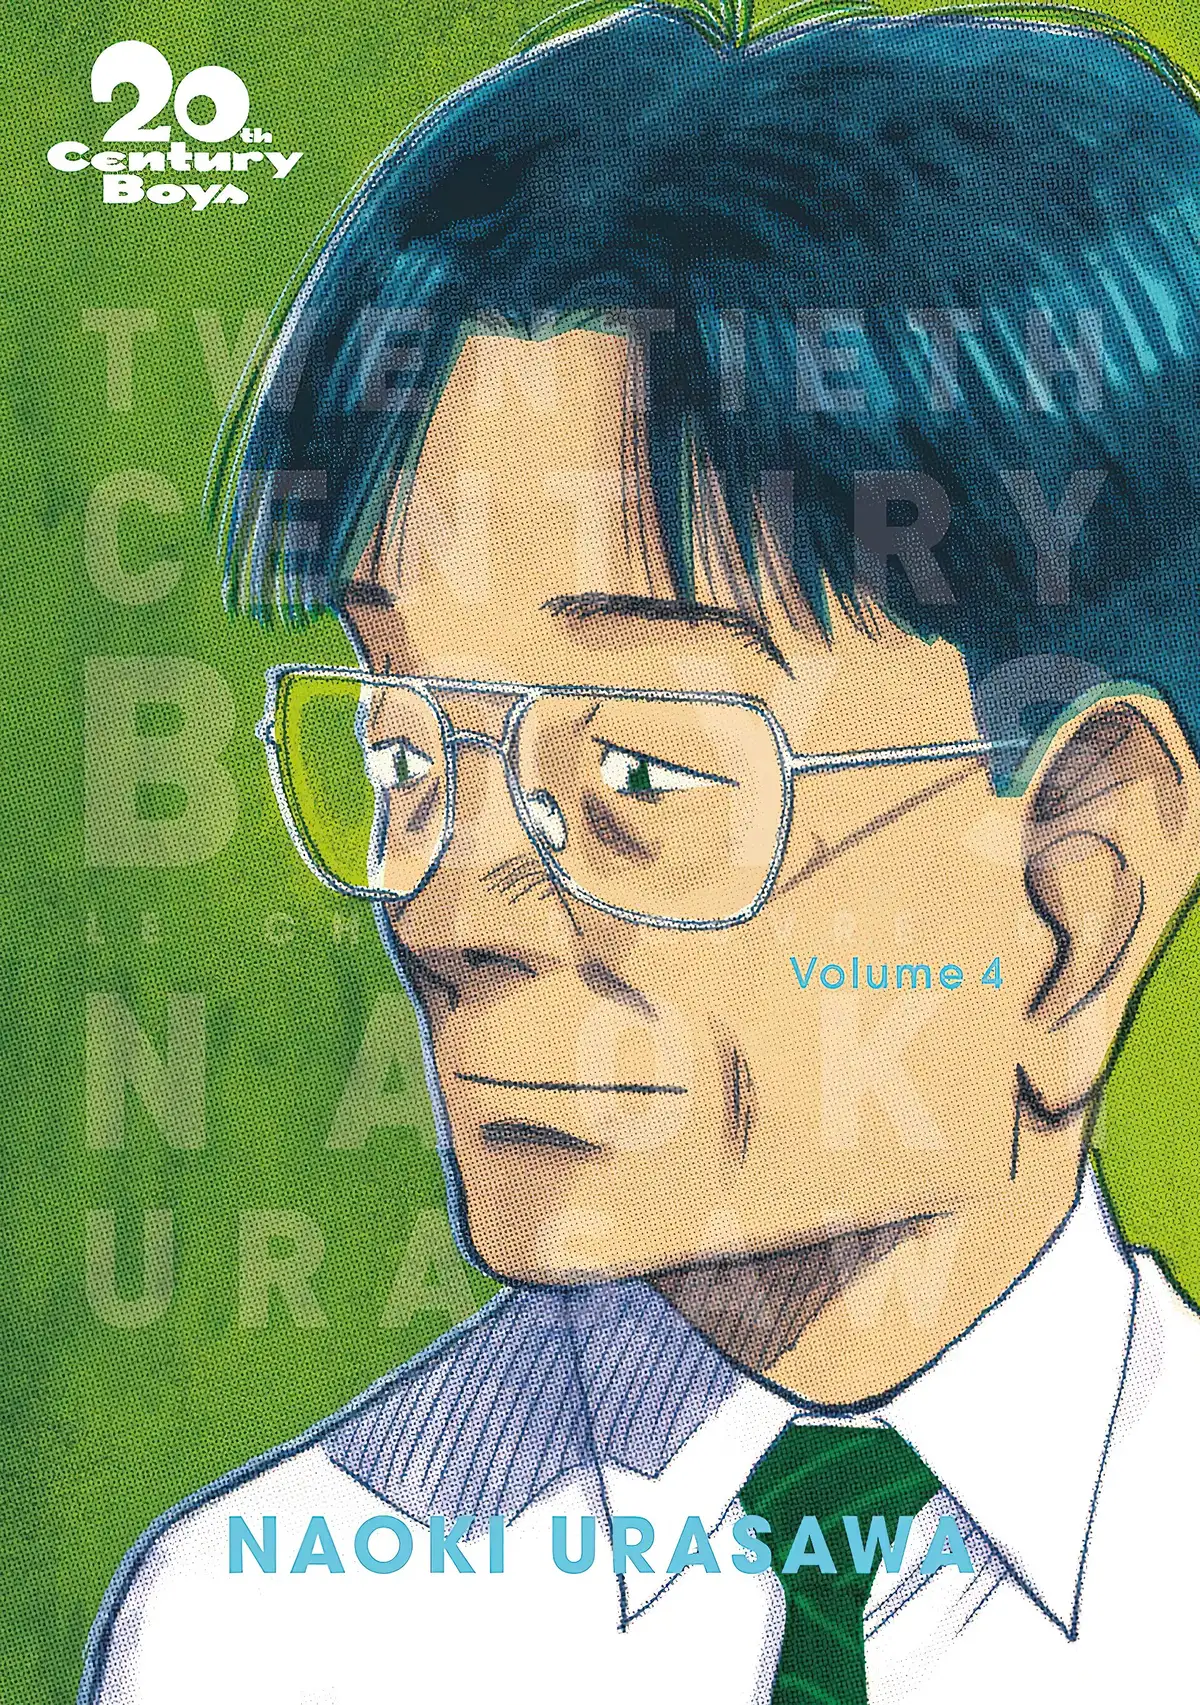 20th Century Boys – Perfect Edition Volume 4 page 1